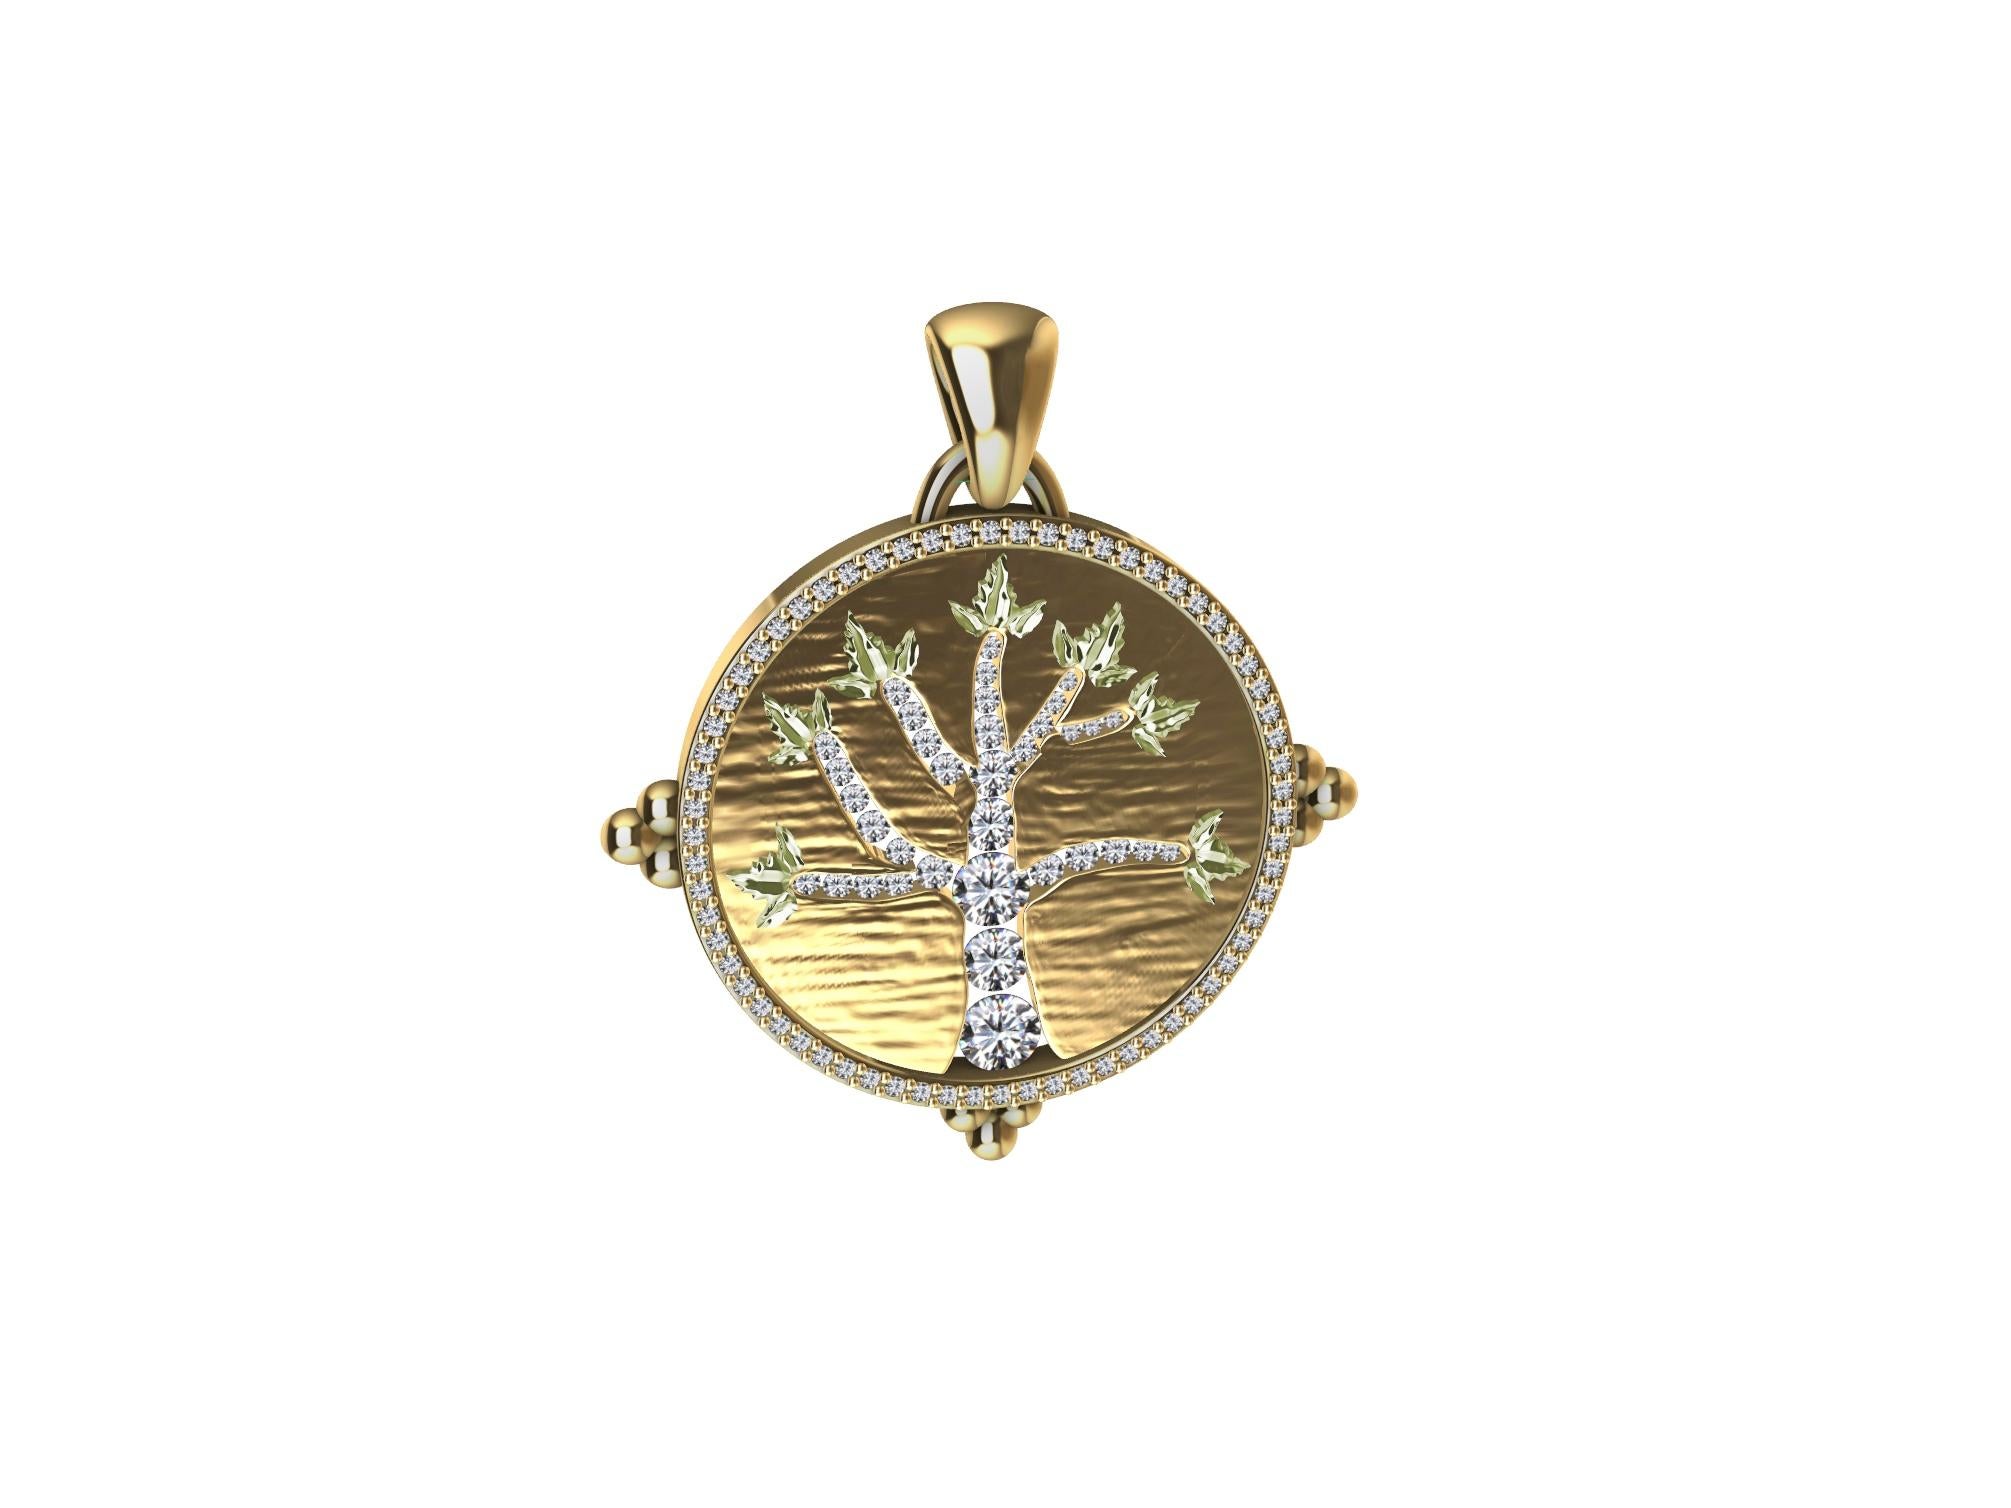 18 Karat Yellow Gold Diamond Tree of Life Pendant, Tiffany designer Thomas Kurilla  has Redesigned the Tree of Life with added architectural details. To bring more joy into your life. Light is Life, why not diamonds for the tree trunk?  Life is